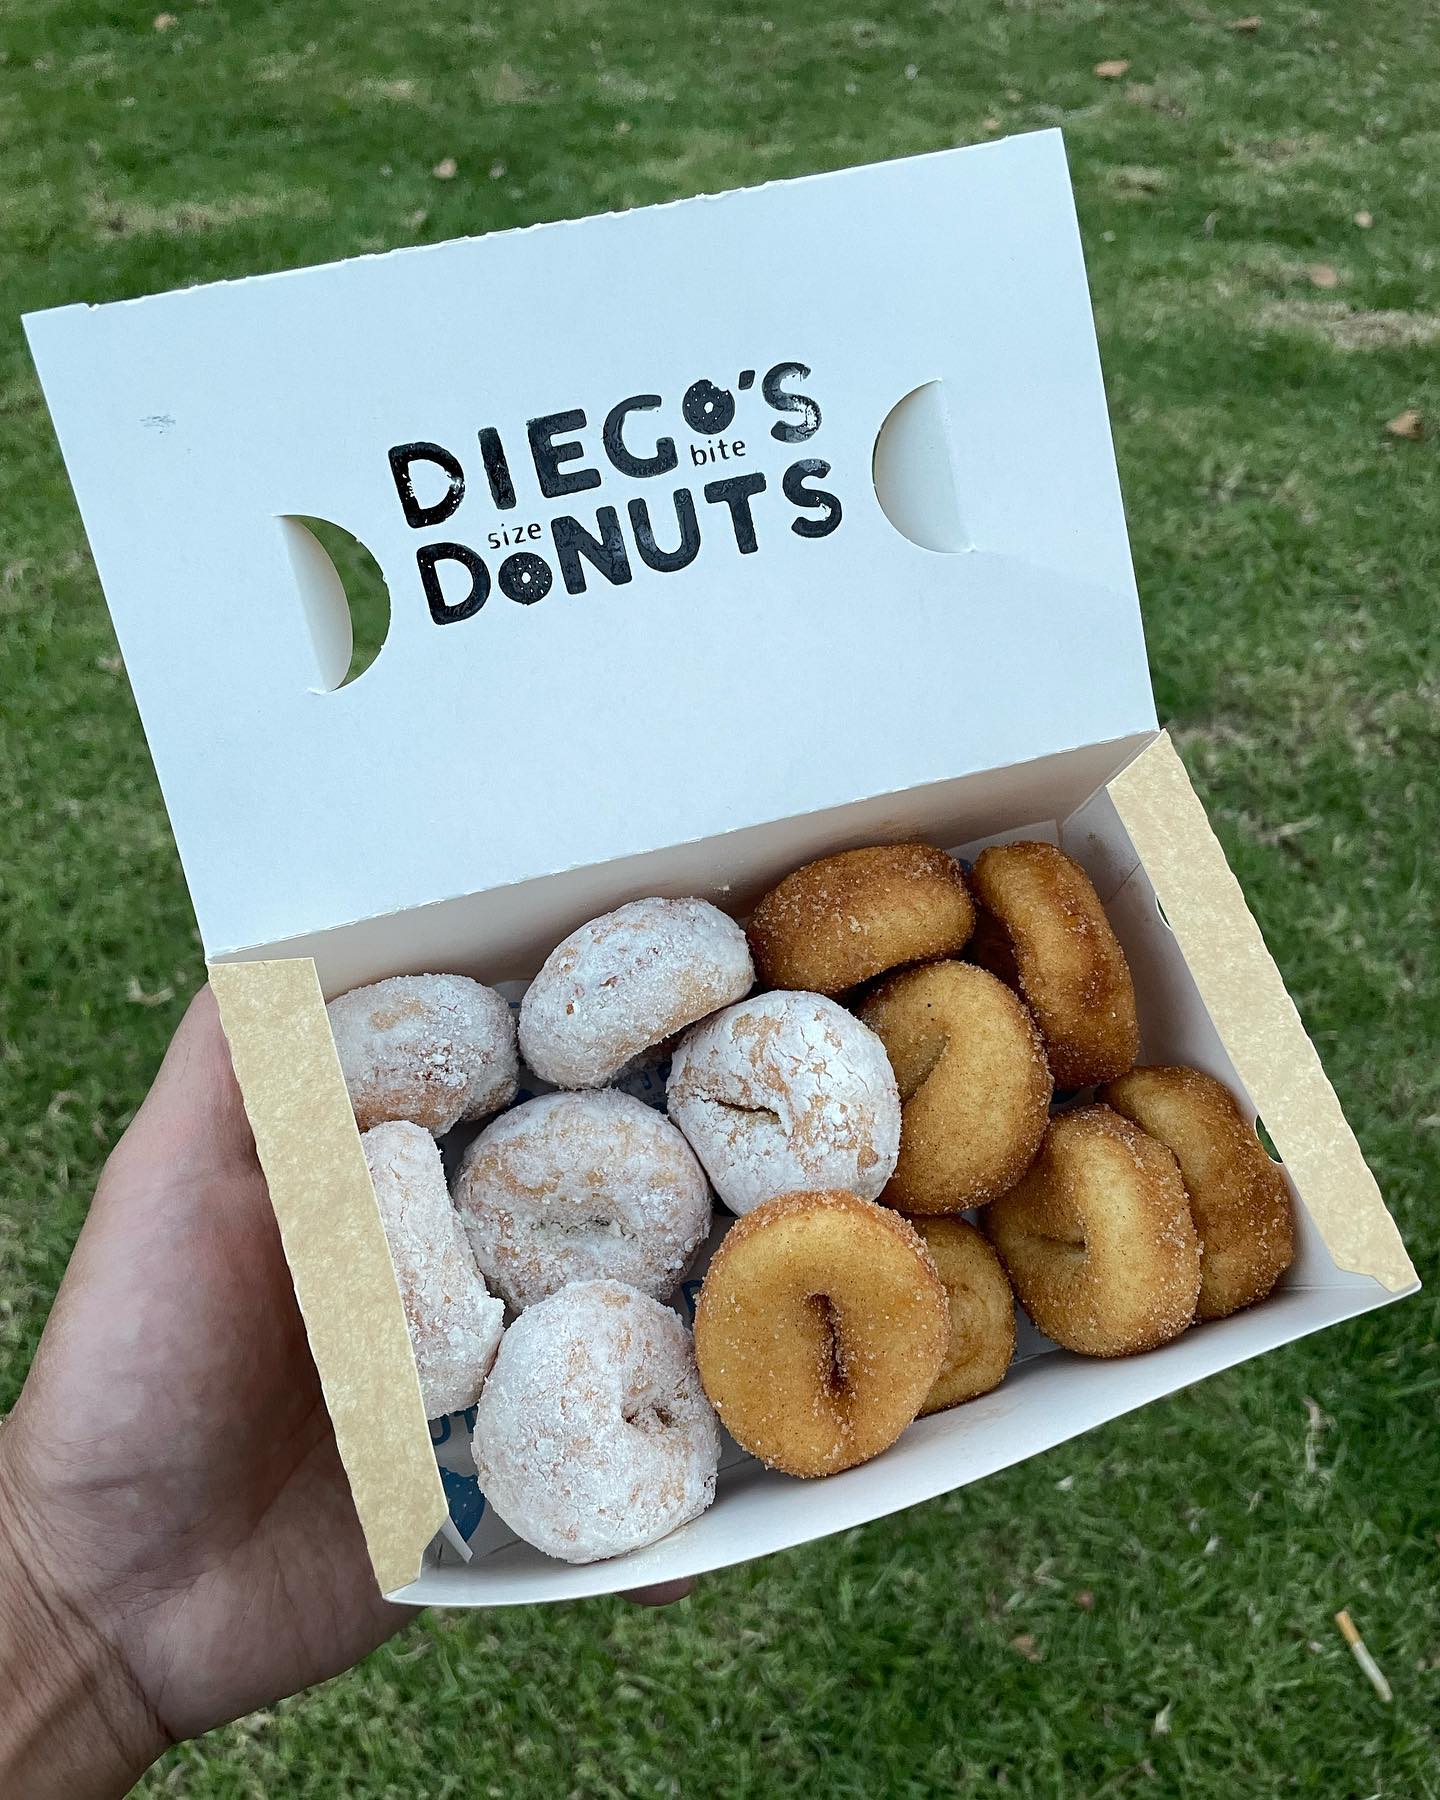 Diego’s Donuts